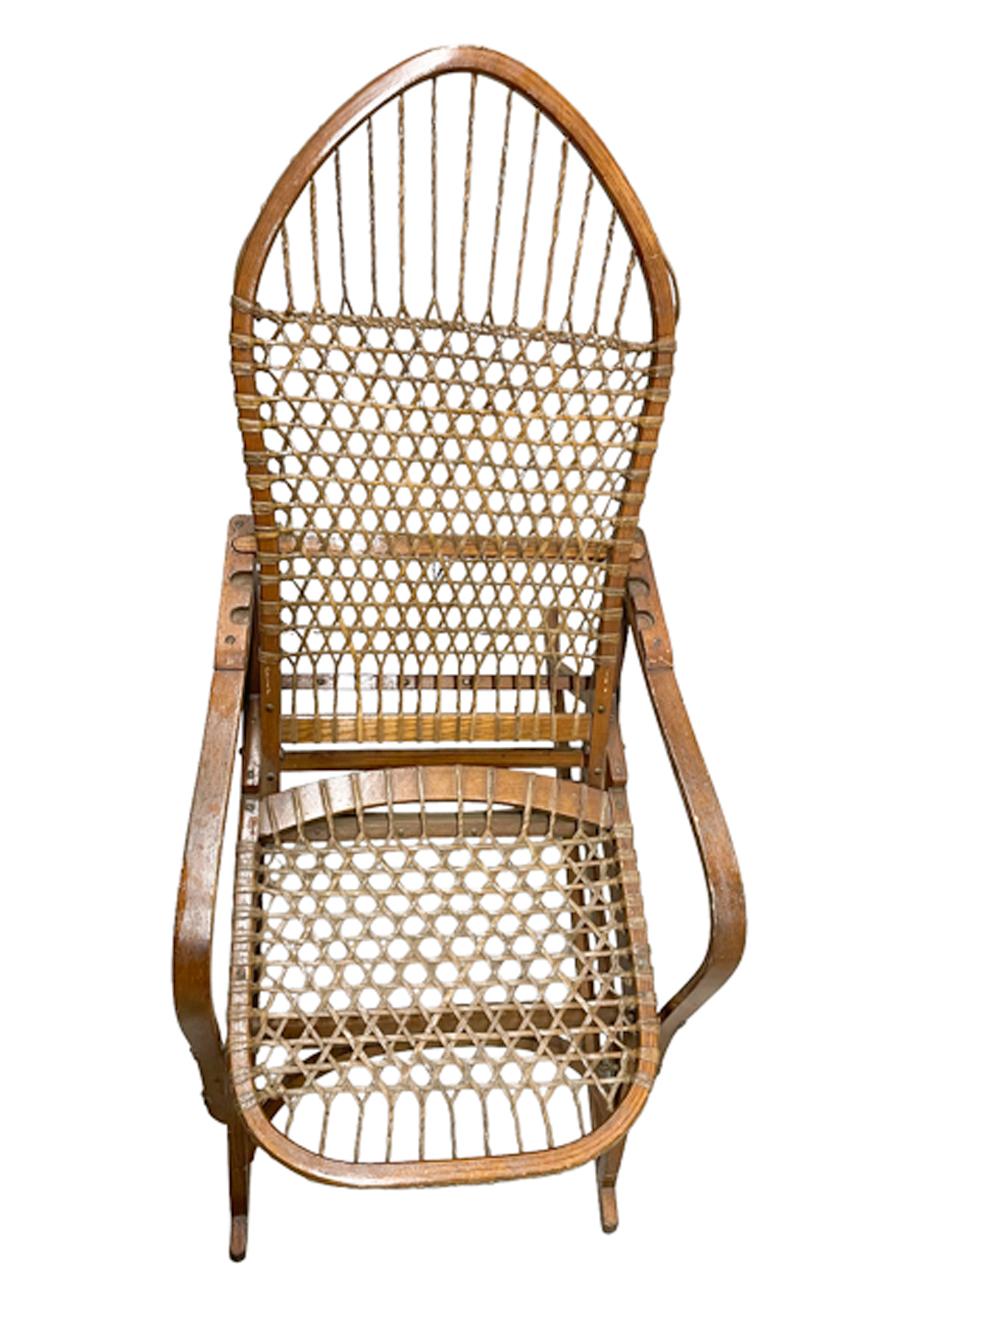 Early 20th Century W.F. Tubbs Sno-Shu Reclining Chair and Detachable Foot Stool For Sale 1